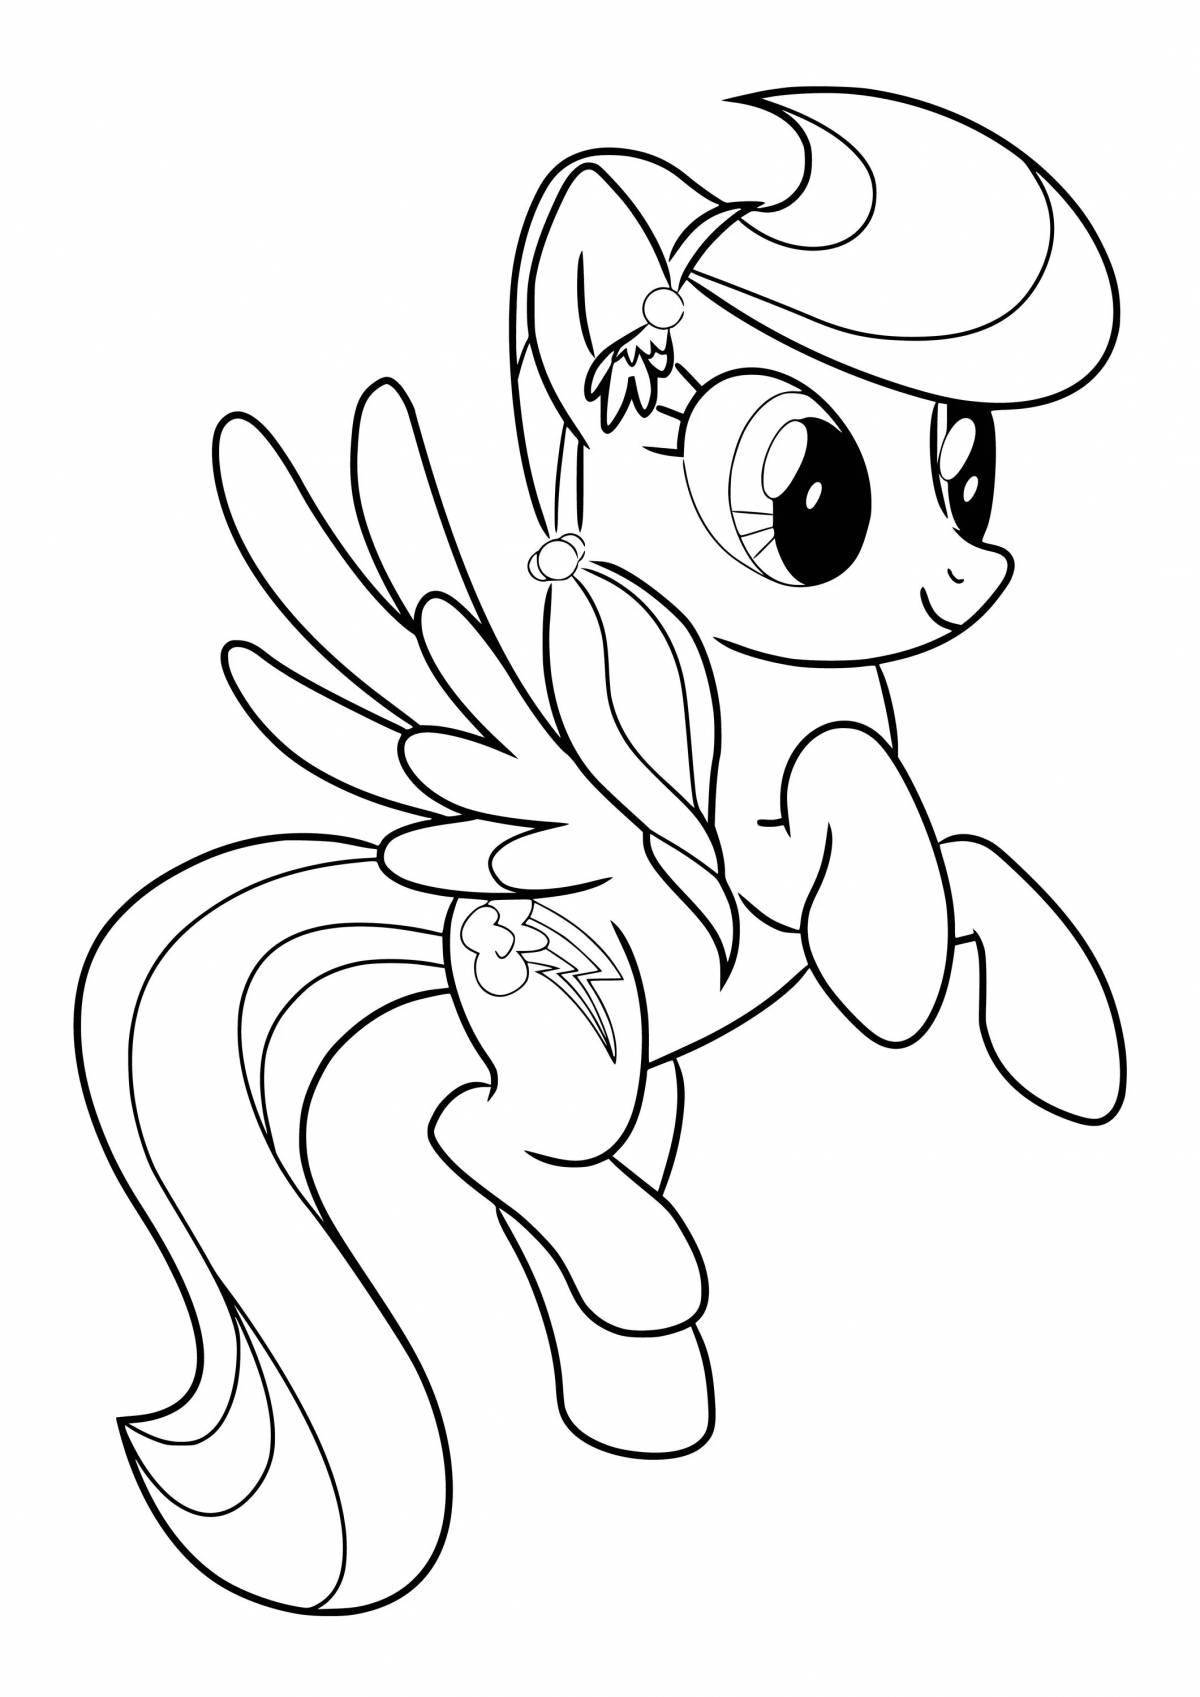 Colorful rainbow pony coloring page